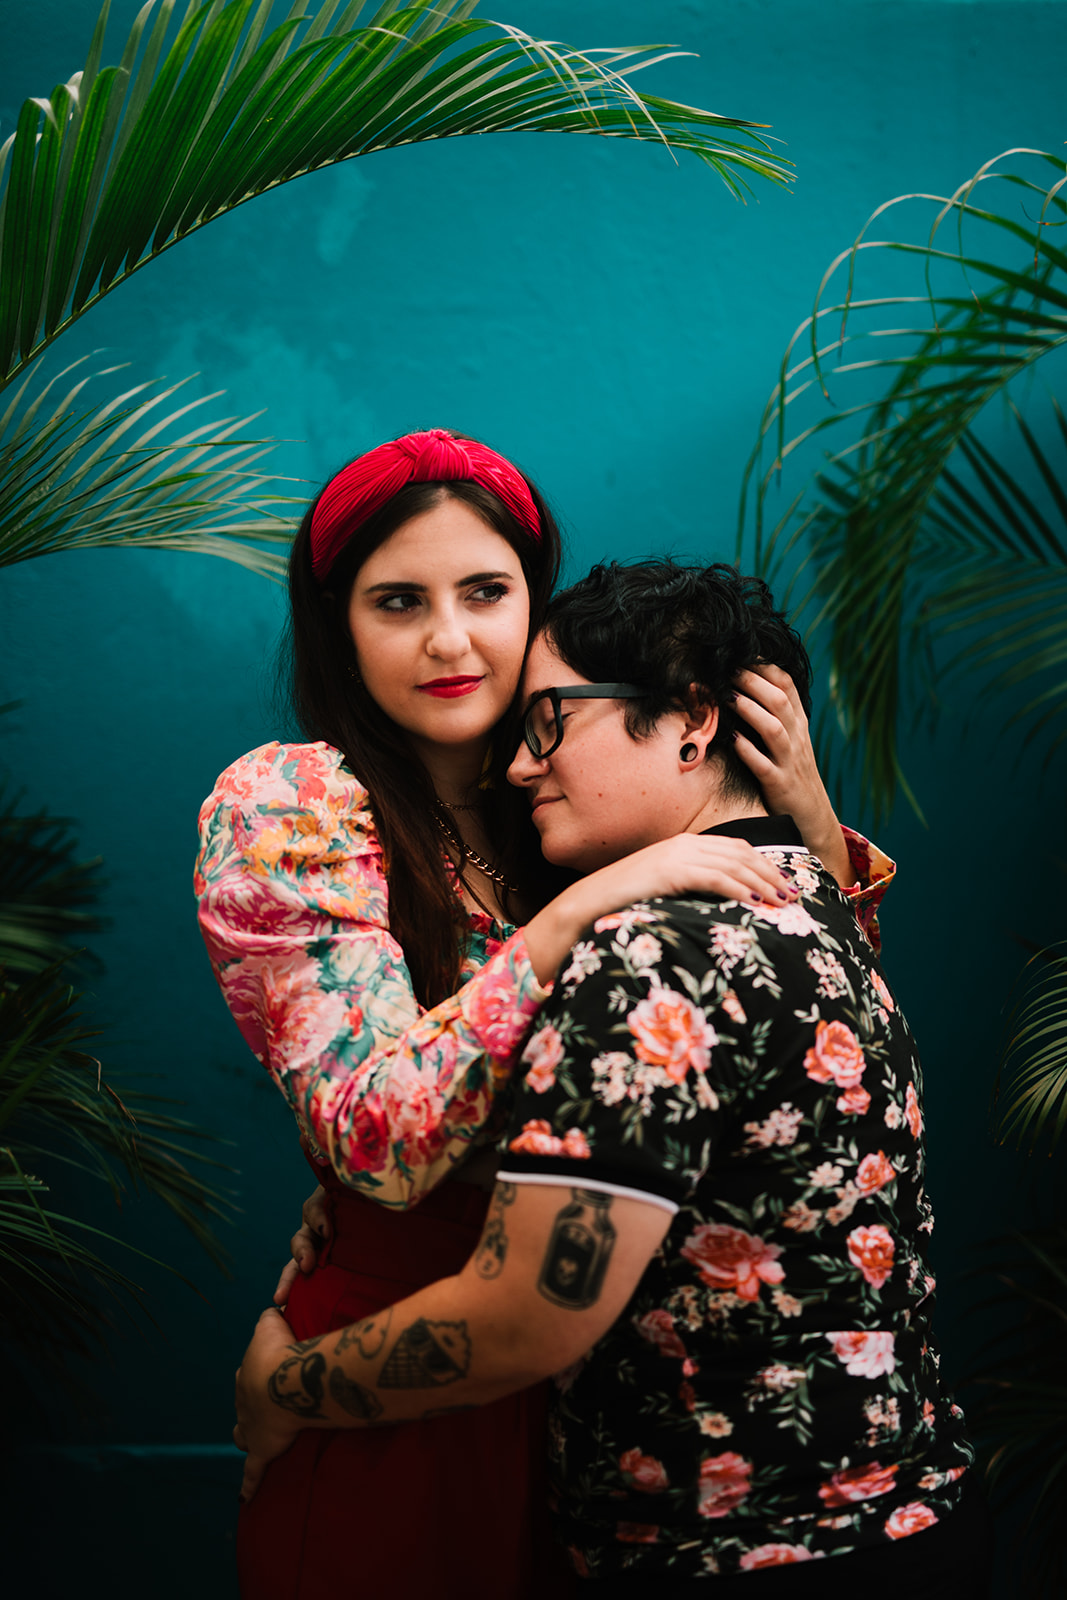 A beautiful queer couple in tropical attire embrace in front of a bright teal wall in San Juan, Puerto Rico.